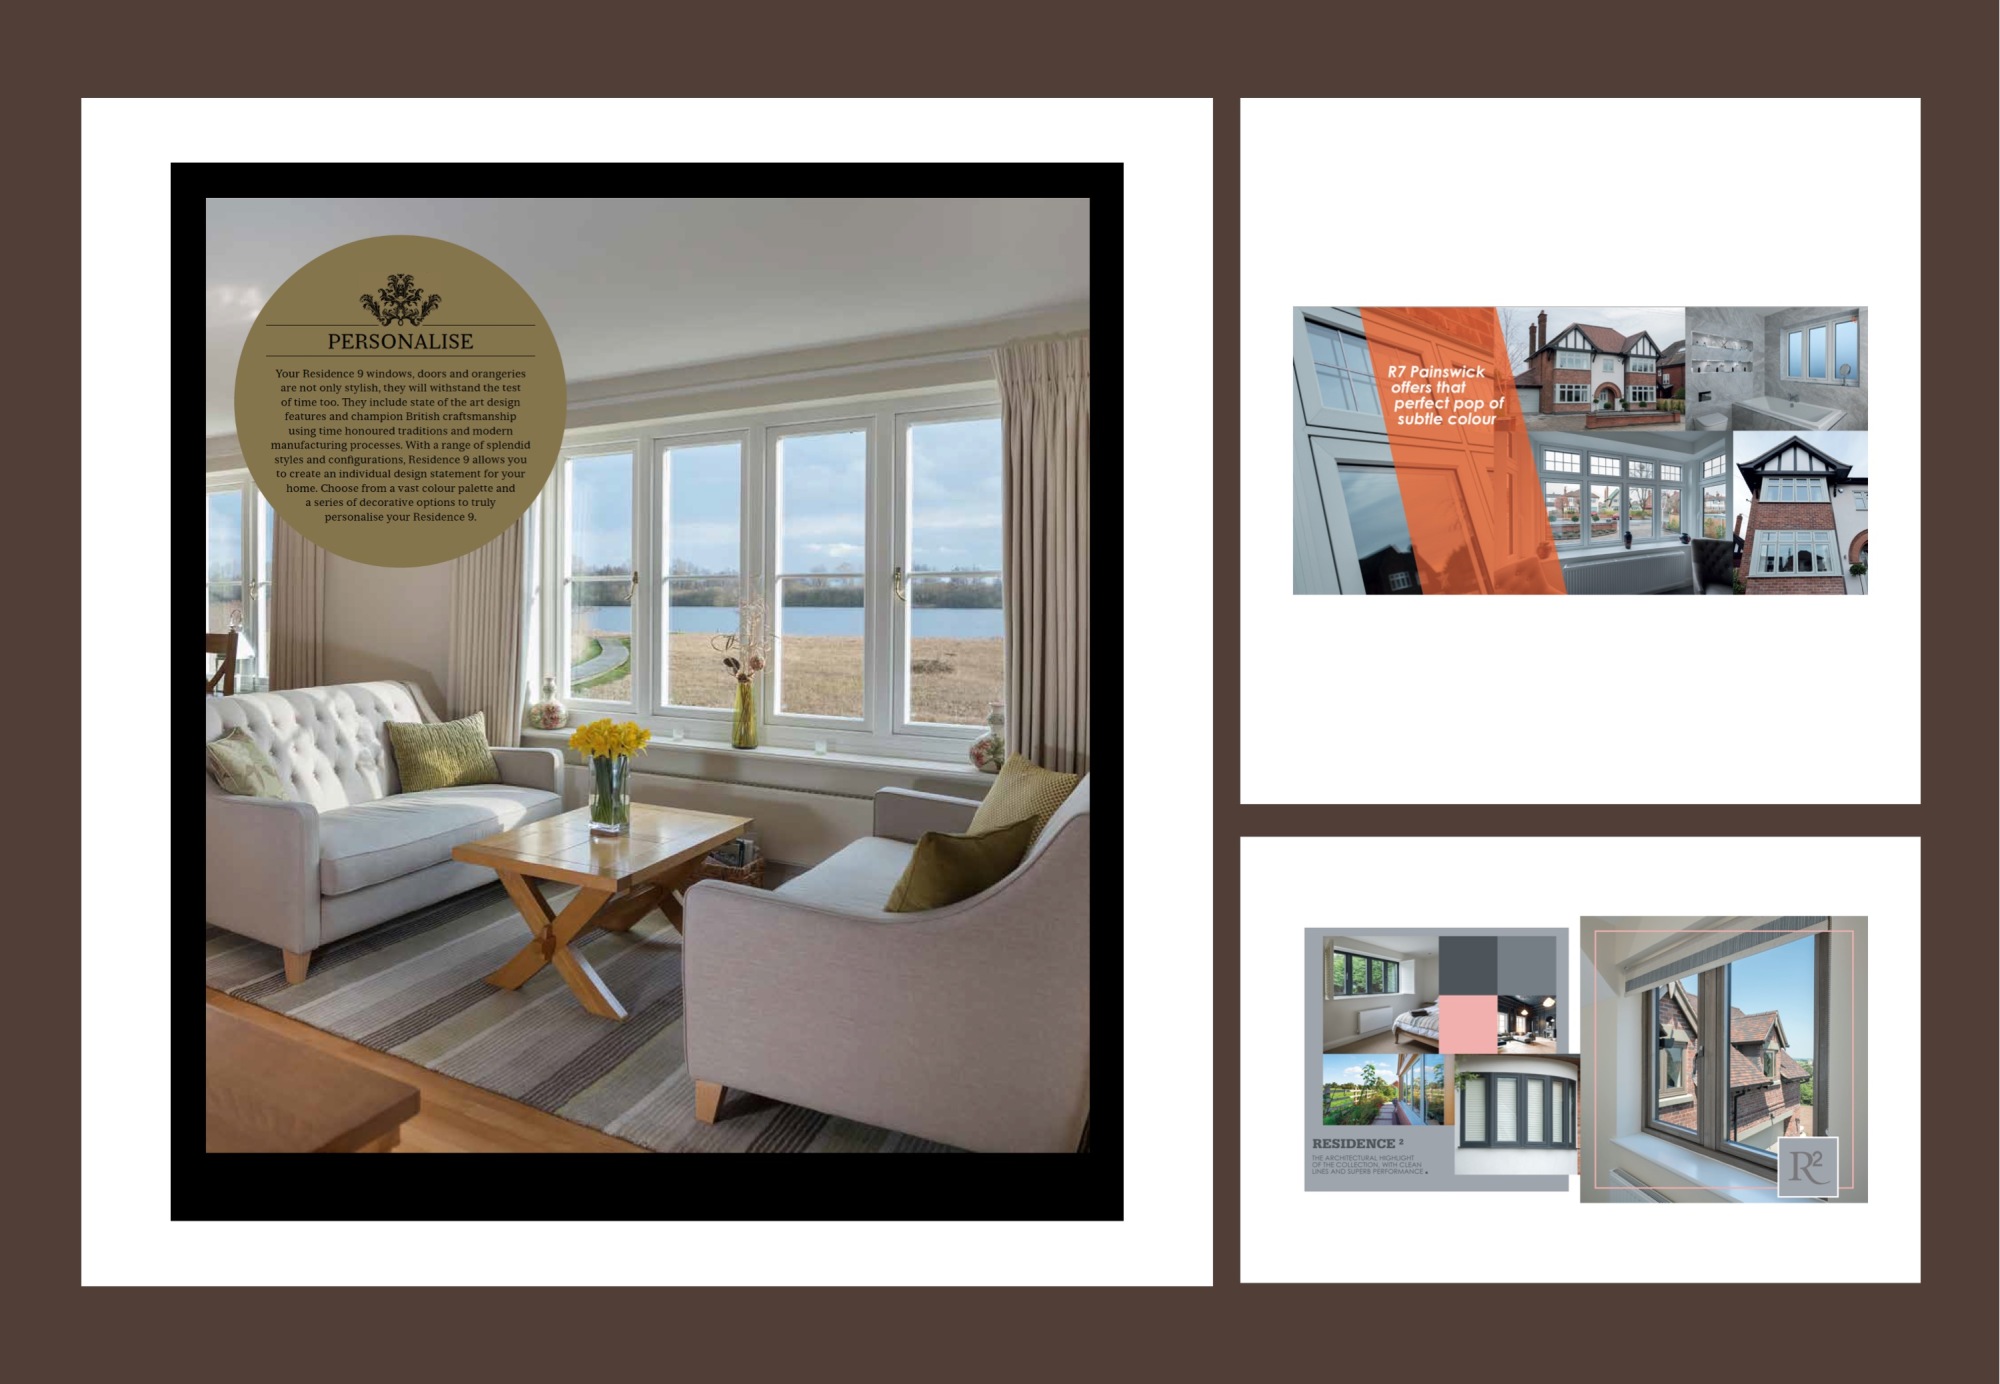 The consumer brochures for The Residence Collection